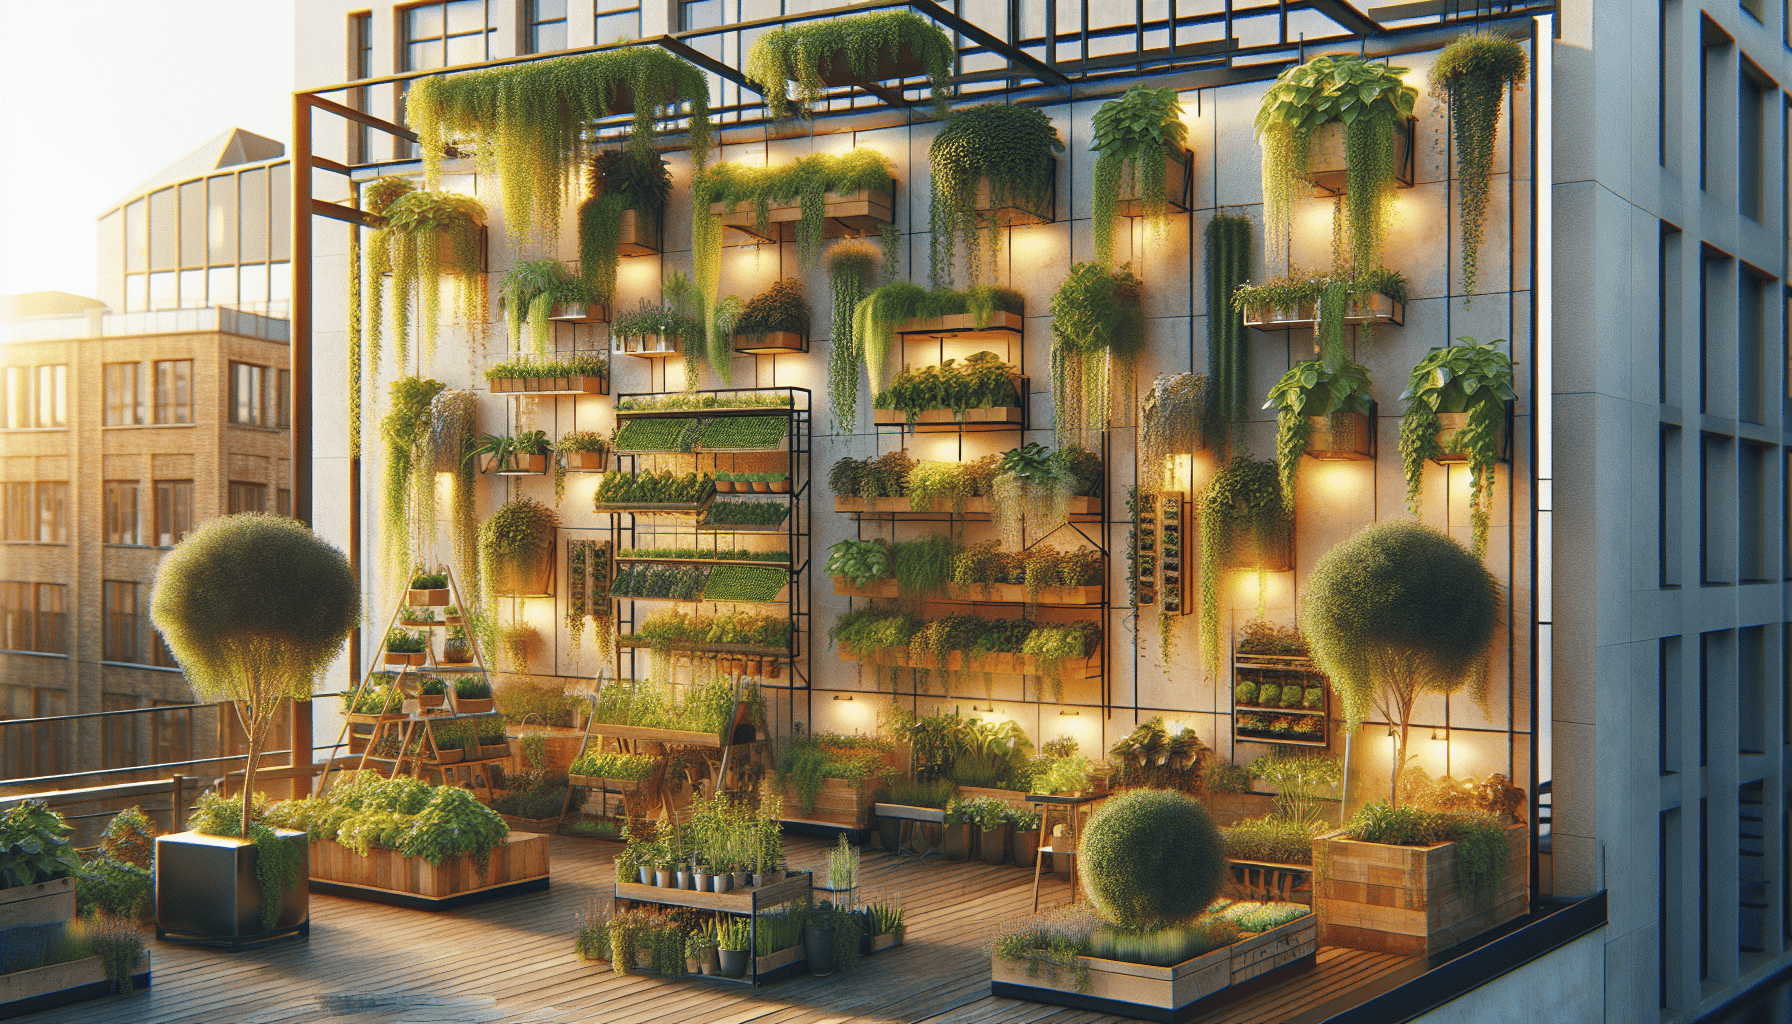 Various vertical gardening systems including hanging planters and wall-mounted frames